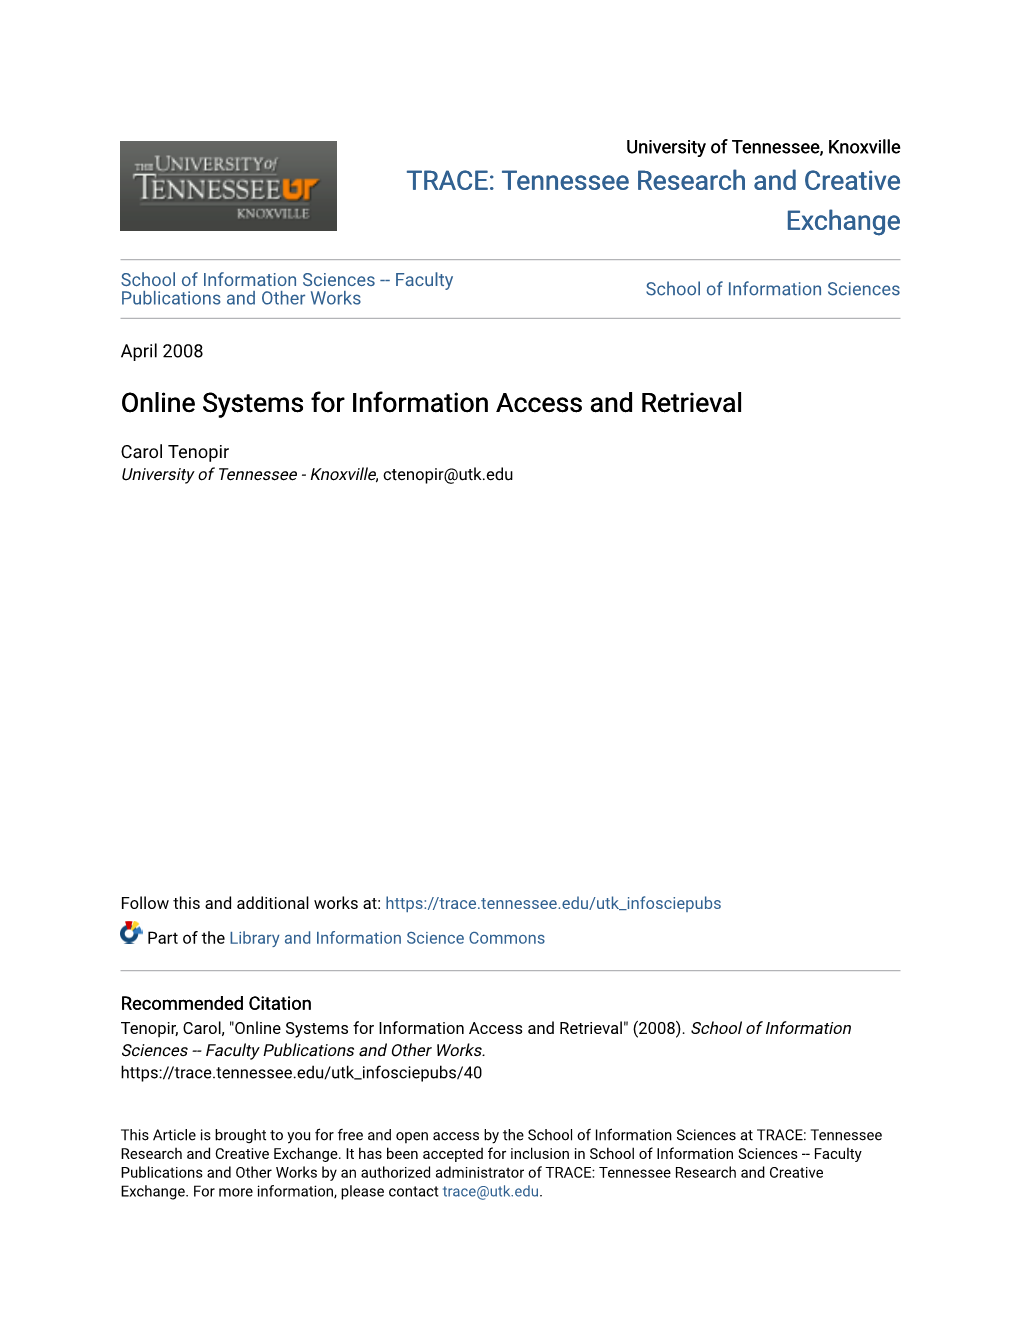 Online Systems for Information Access and Retrieval